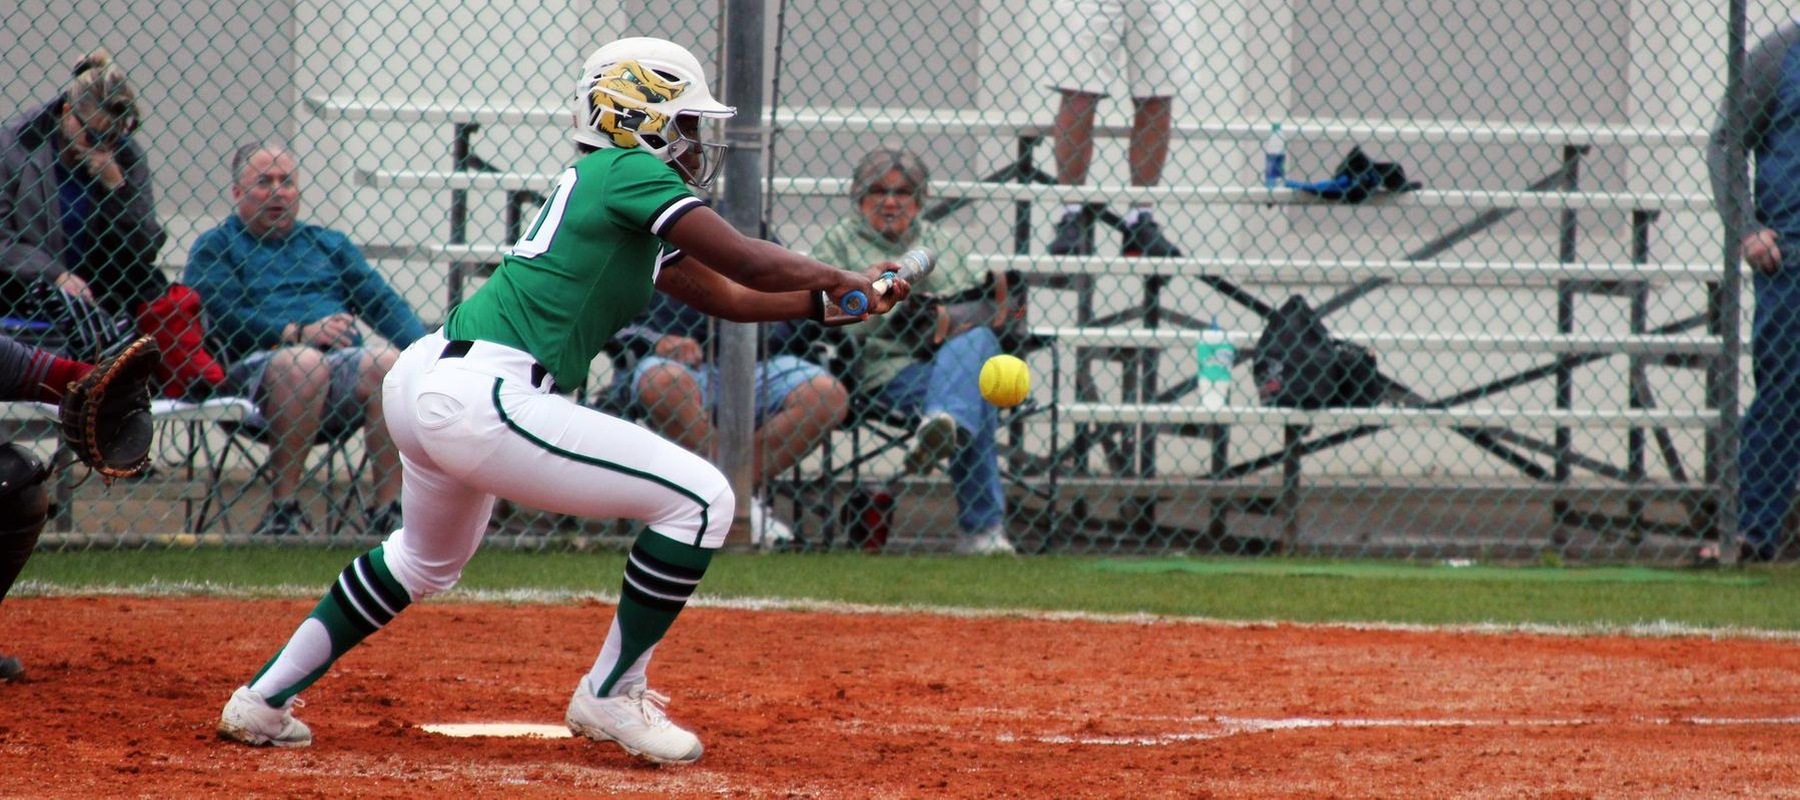 Copyright 2019; Wilmington University. All rights reserved. Photo of Rosa'Lynn Burton who had three hits in game one at Florida Tech. Photo by Mary Kate Rumbaugh March 5, 2019 at No. 9 Florida Tech.